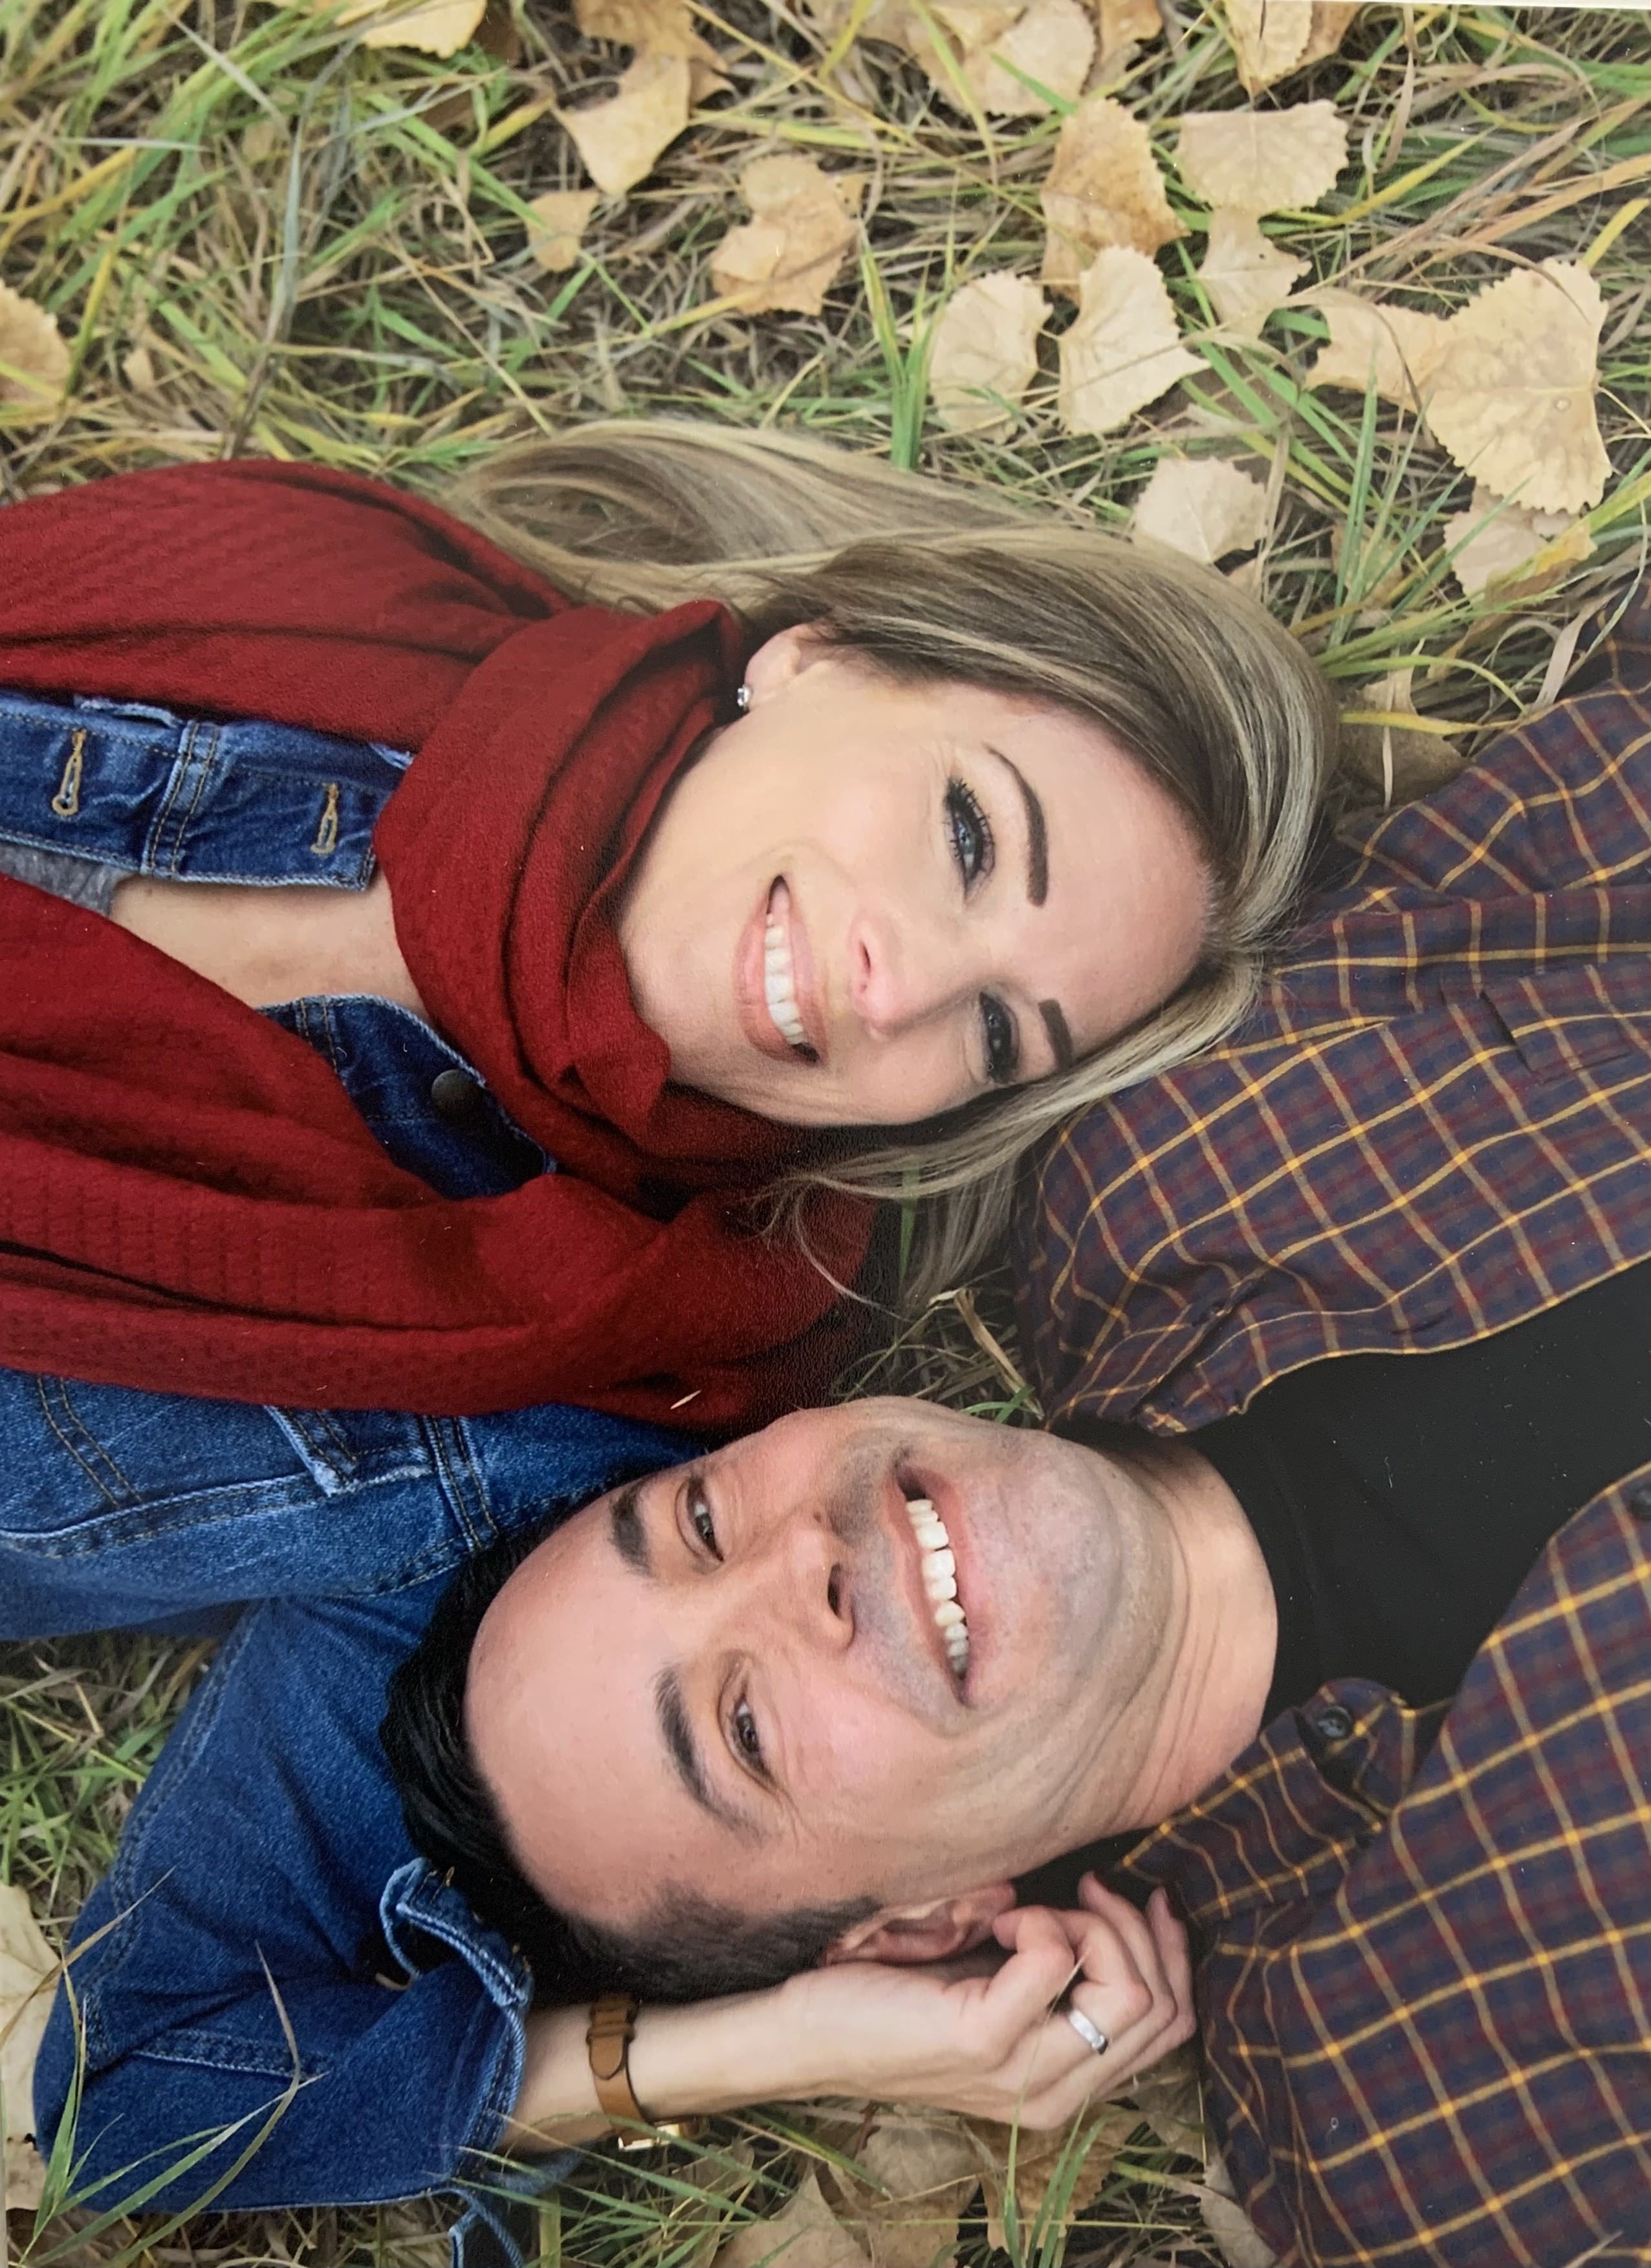 A couple laugh together while lying upside down in the Autumn